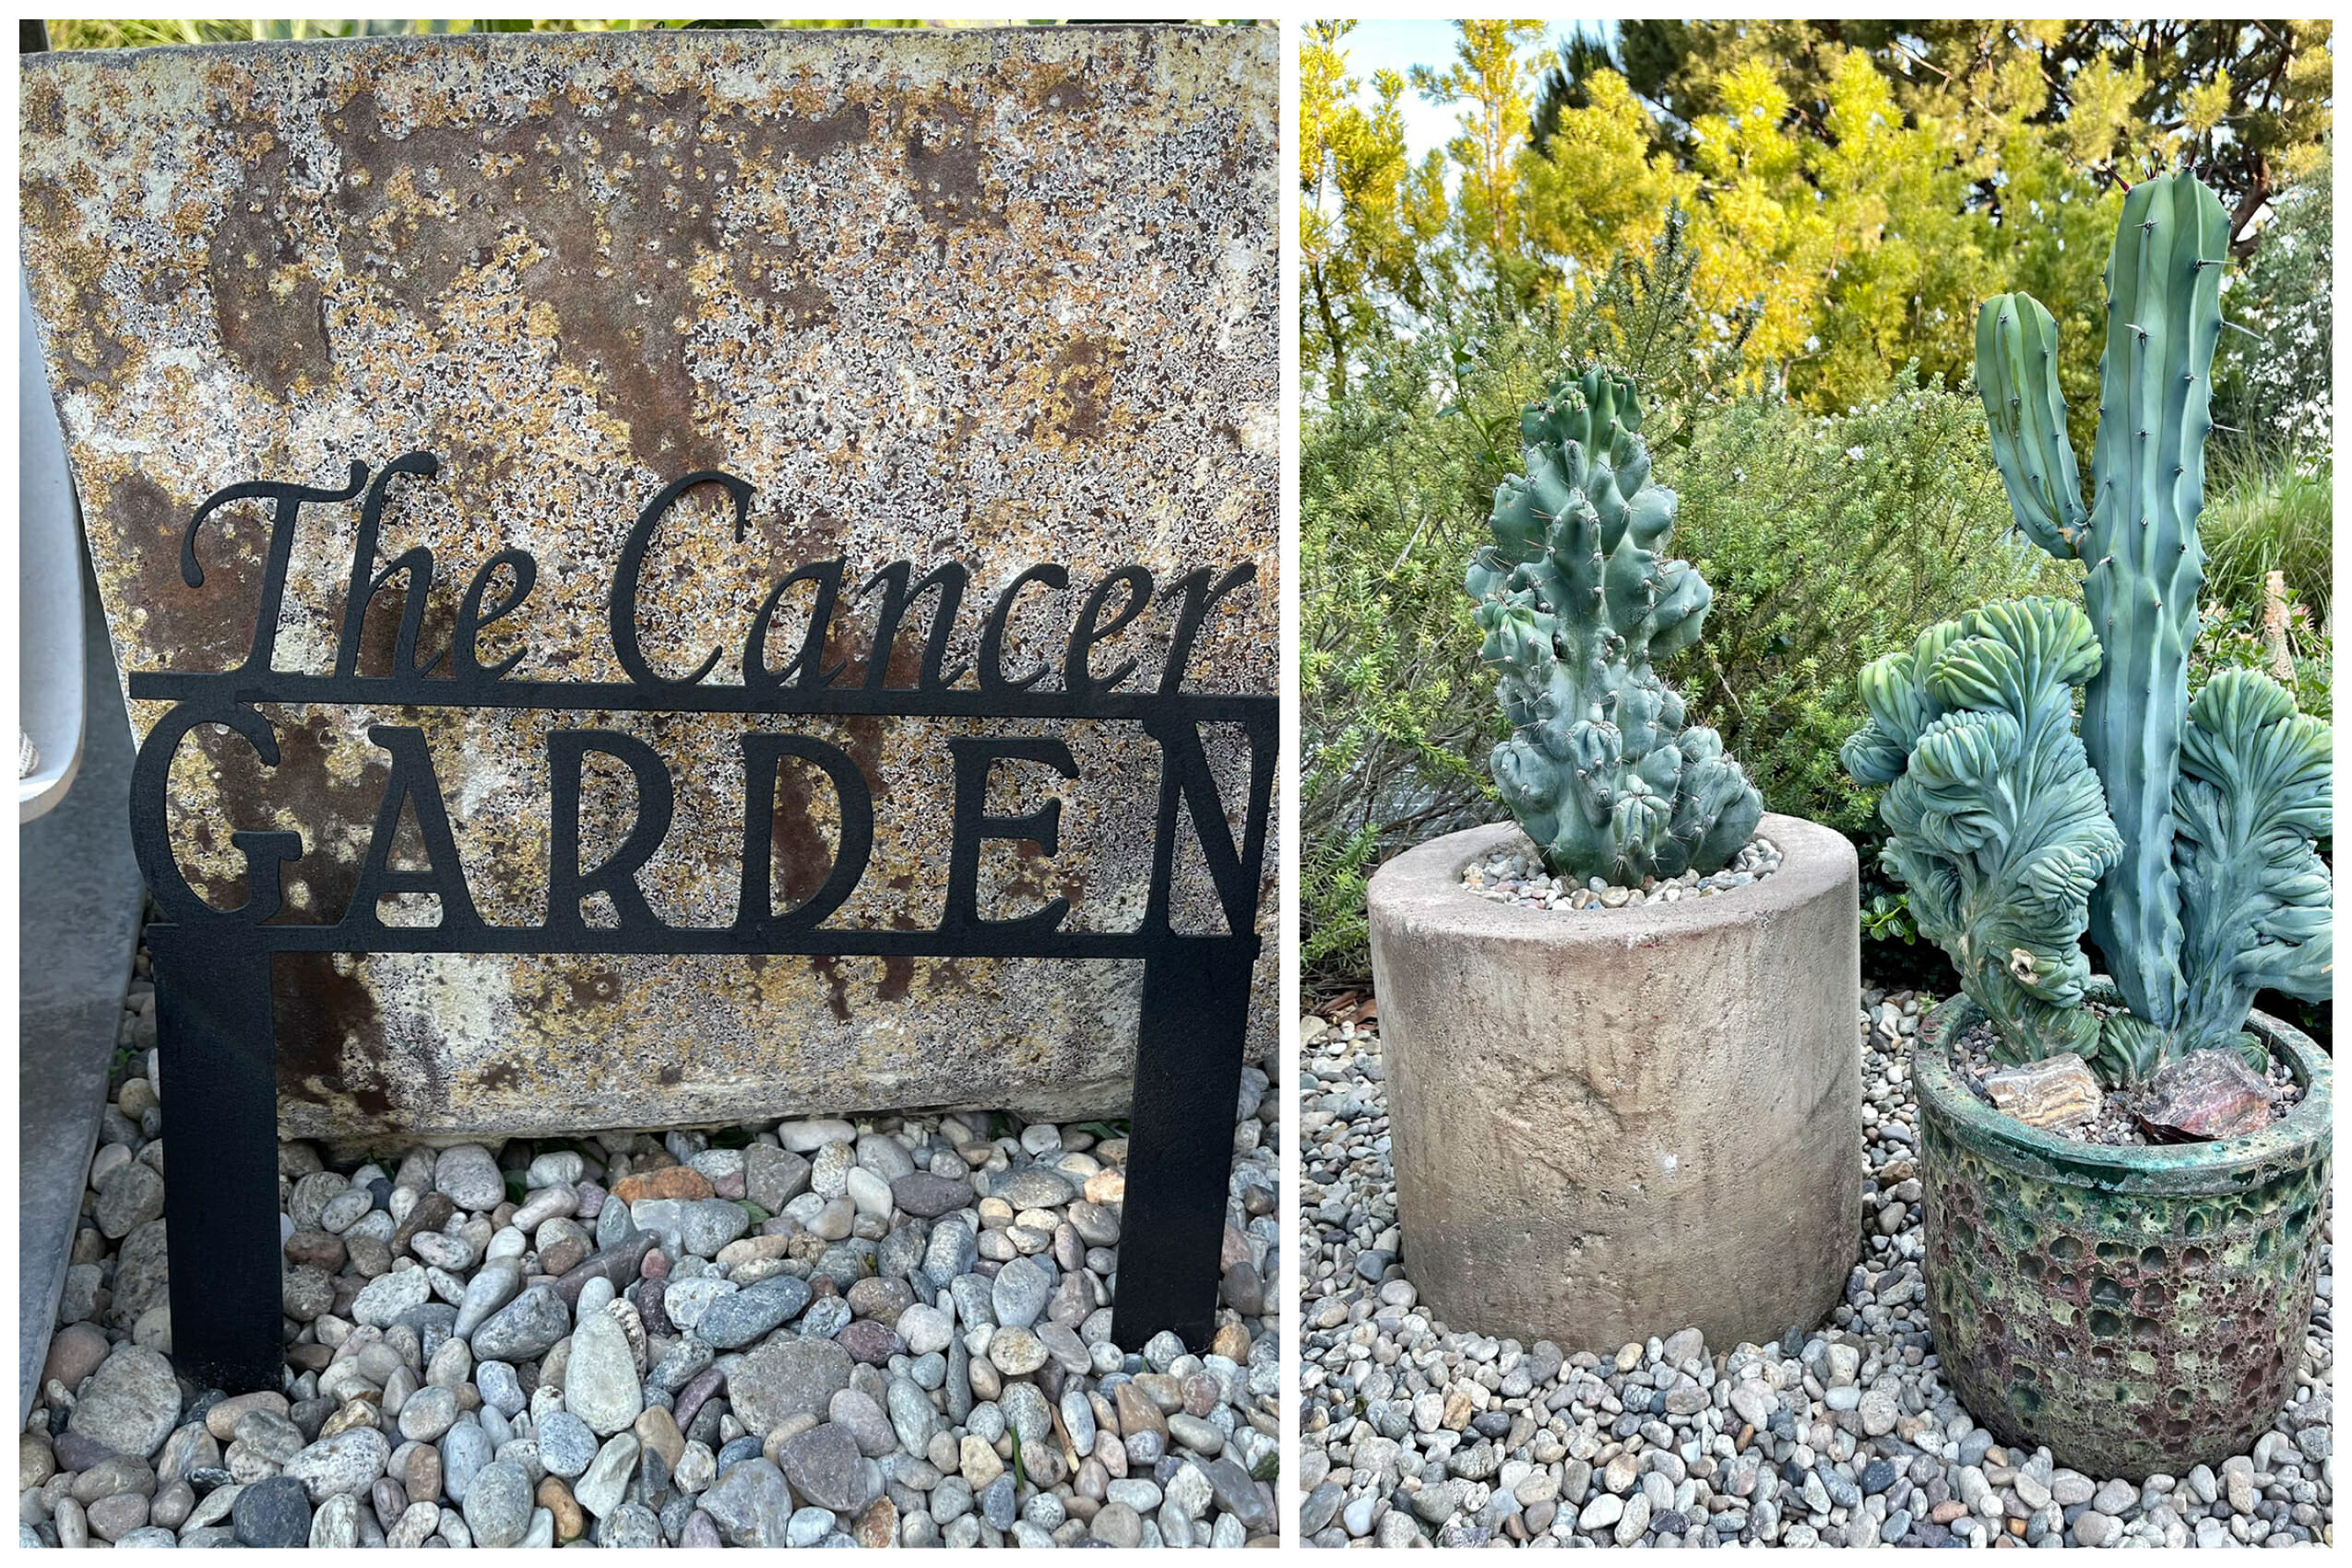 A black metal sign saying 'The Cancer Garden', two cacti in stone pots